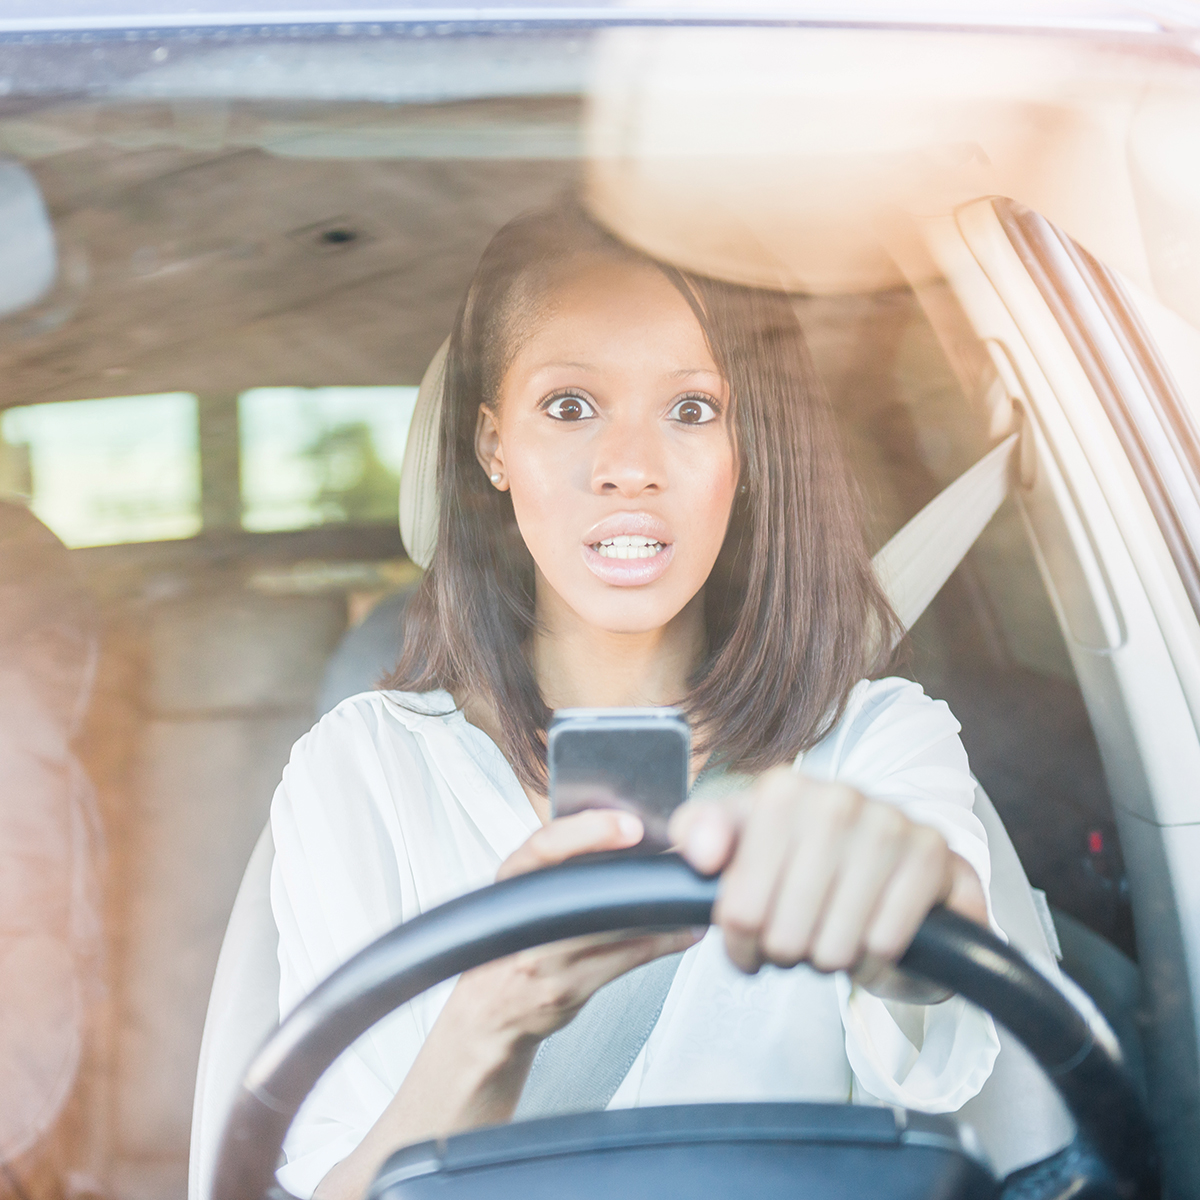 Teen driving while look at her cell phone and being distracted 